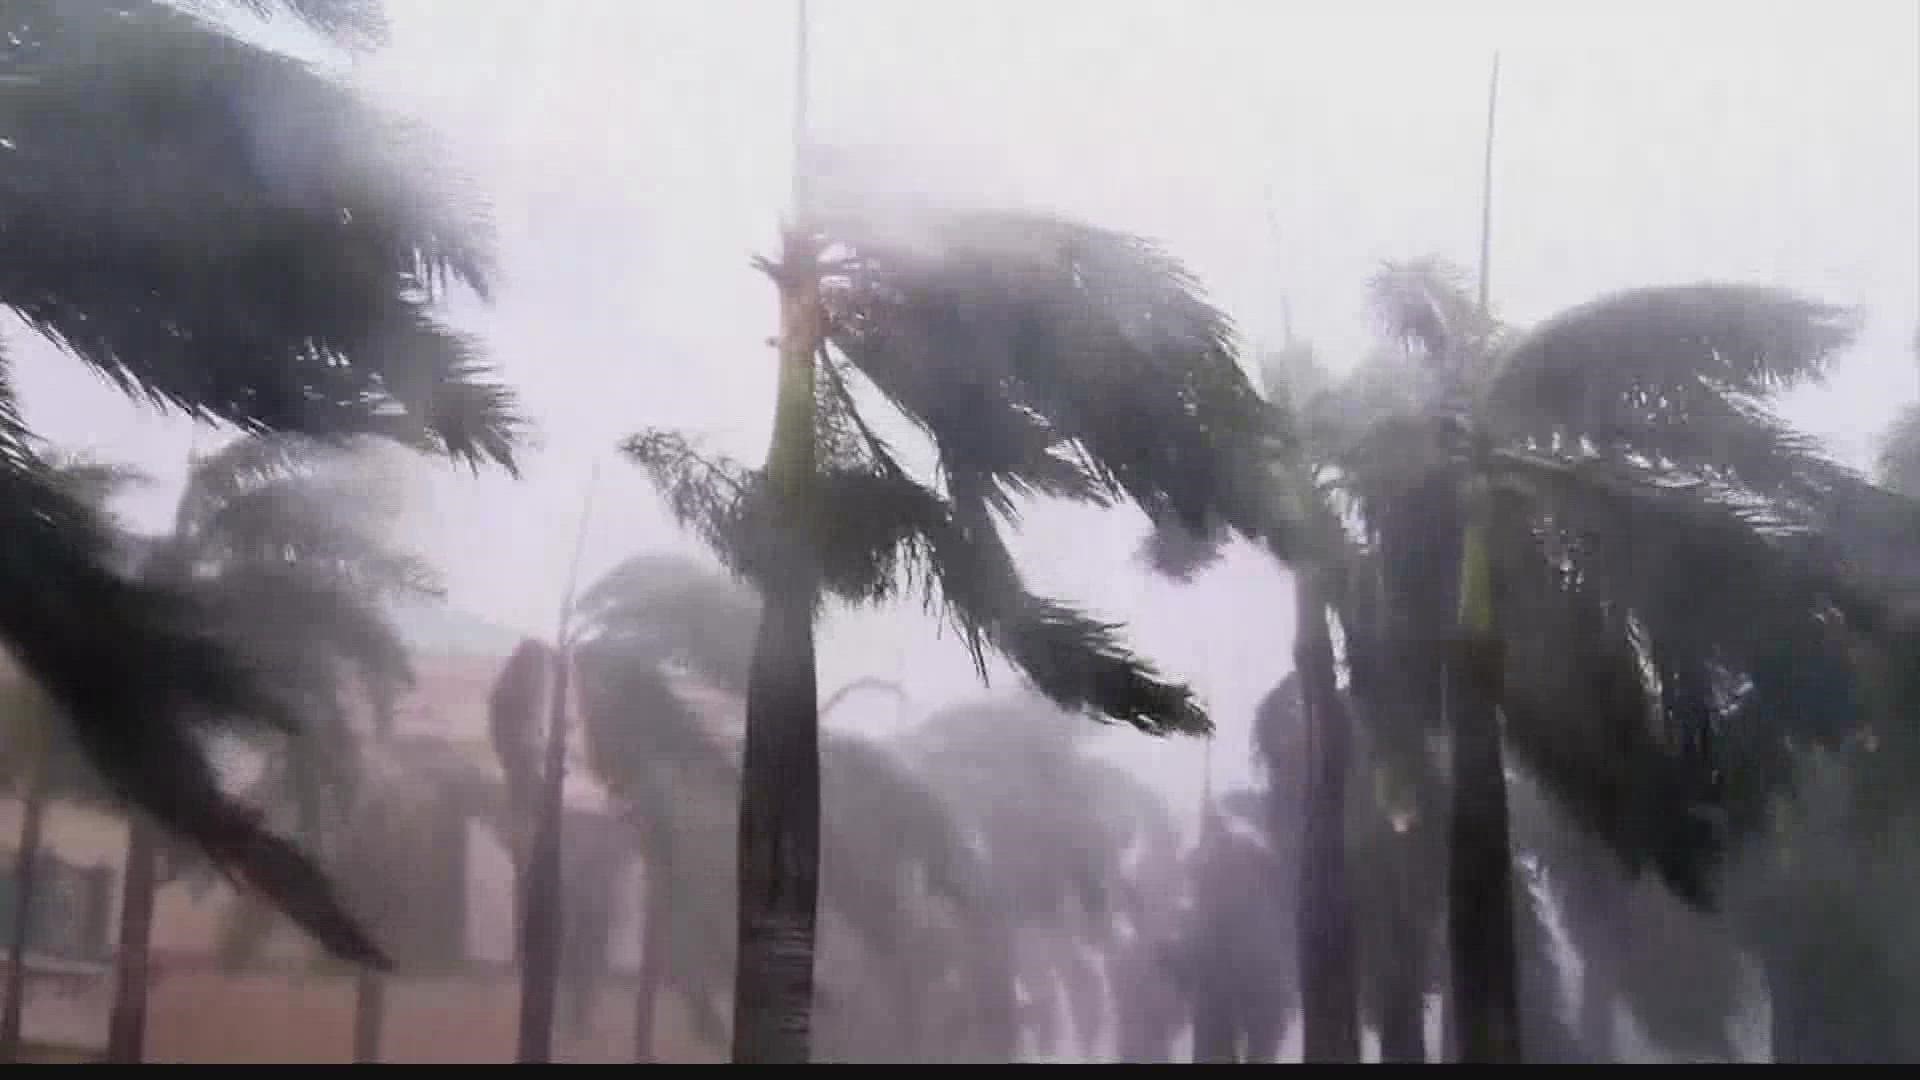 First Coast News Meteorologist walks us through exactly what happened during that storm.